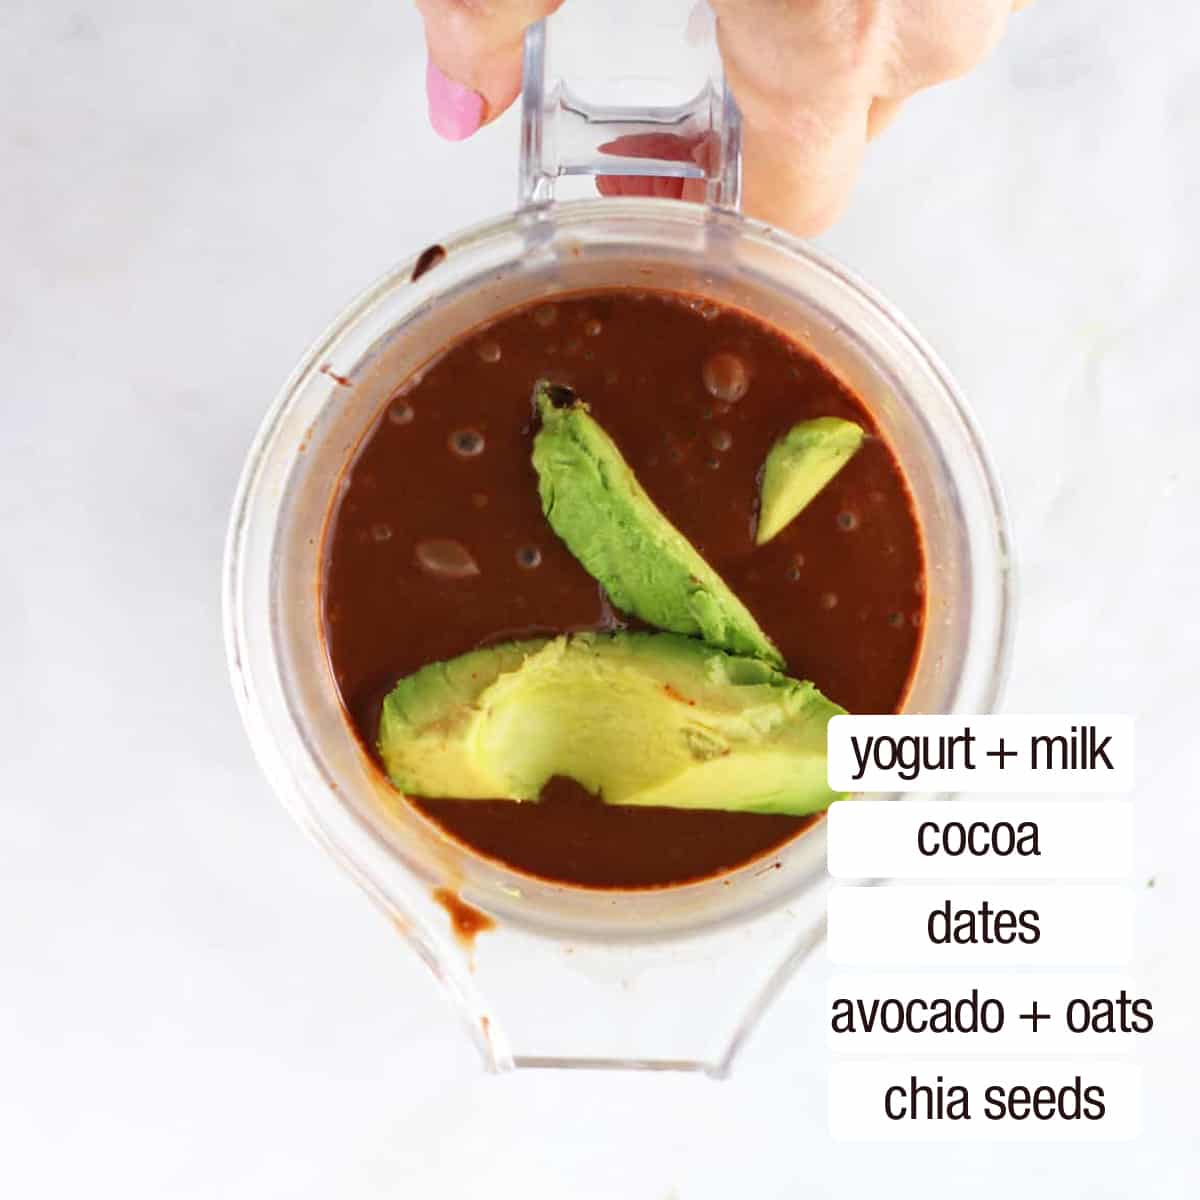 overhead view of chocolate smoothie and avocado in blender jar